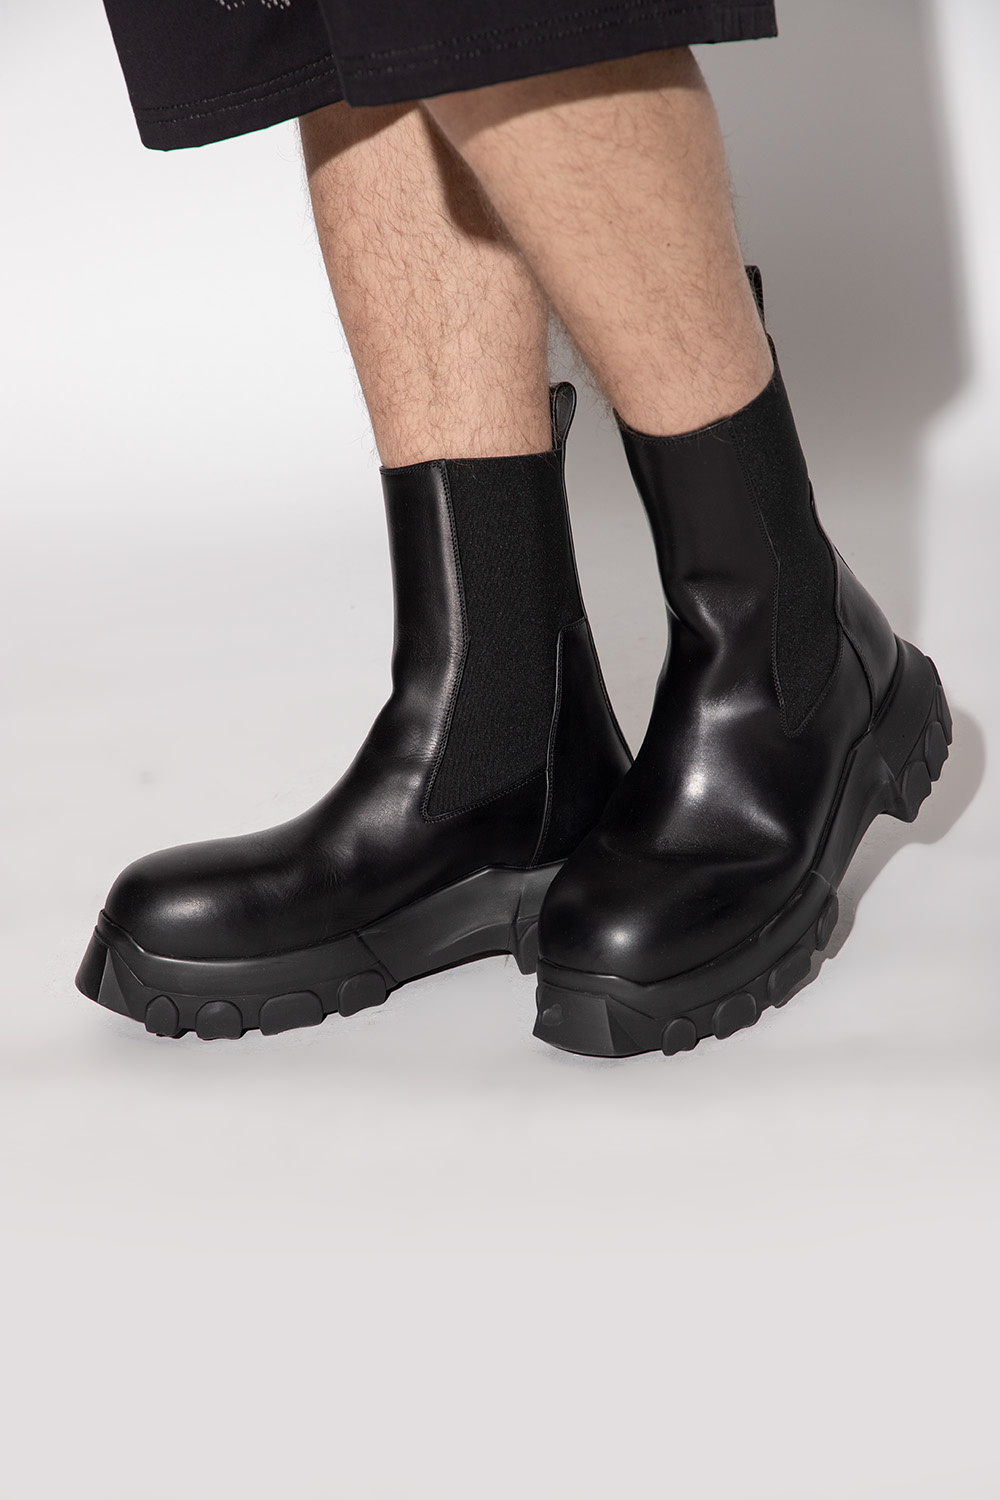 Rick Owens 'Beatle Bozo Tractor' leather ankle boots | Men's